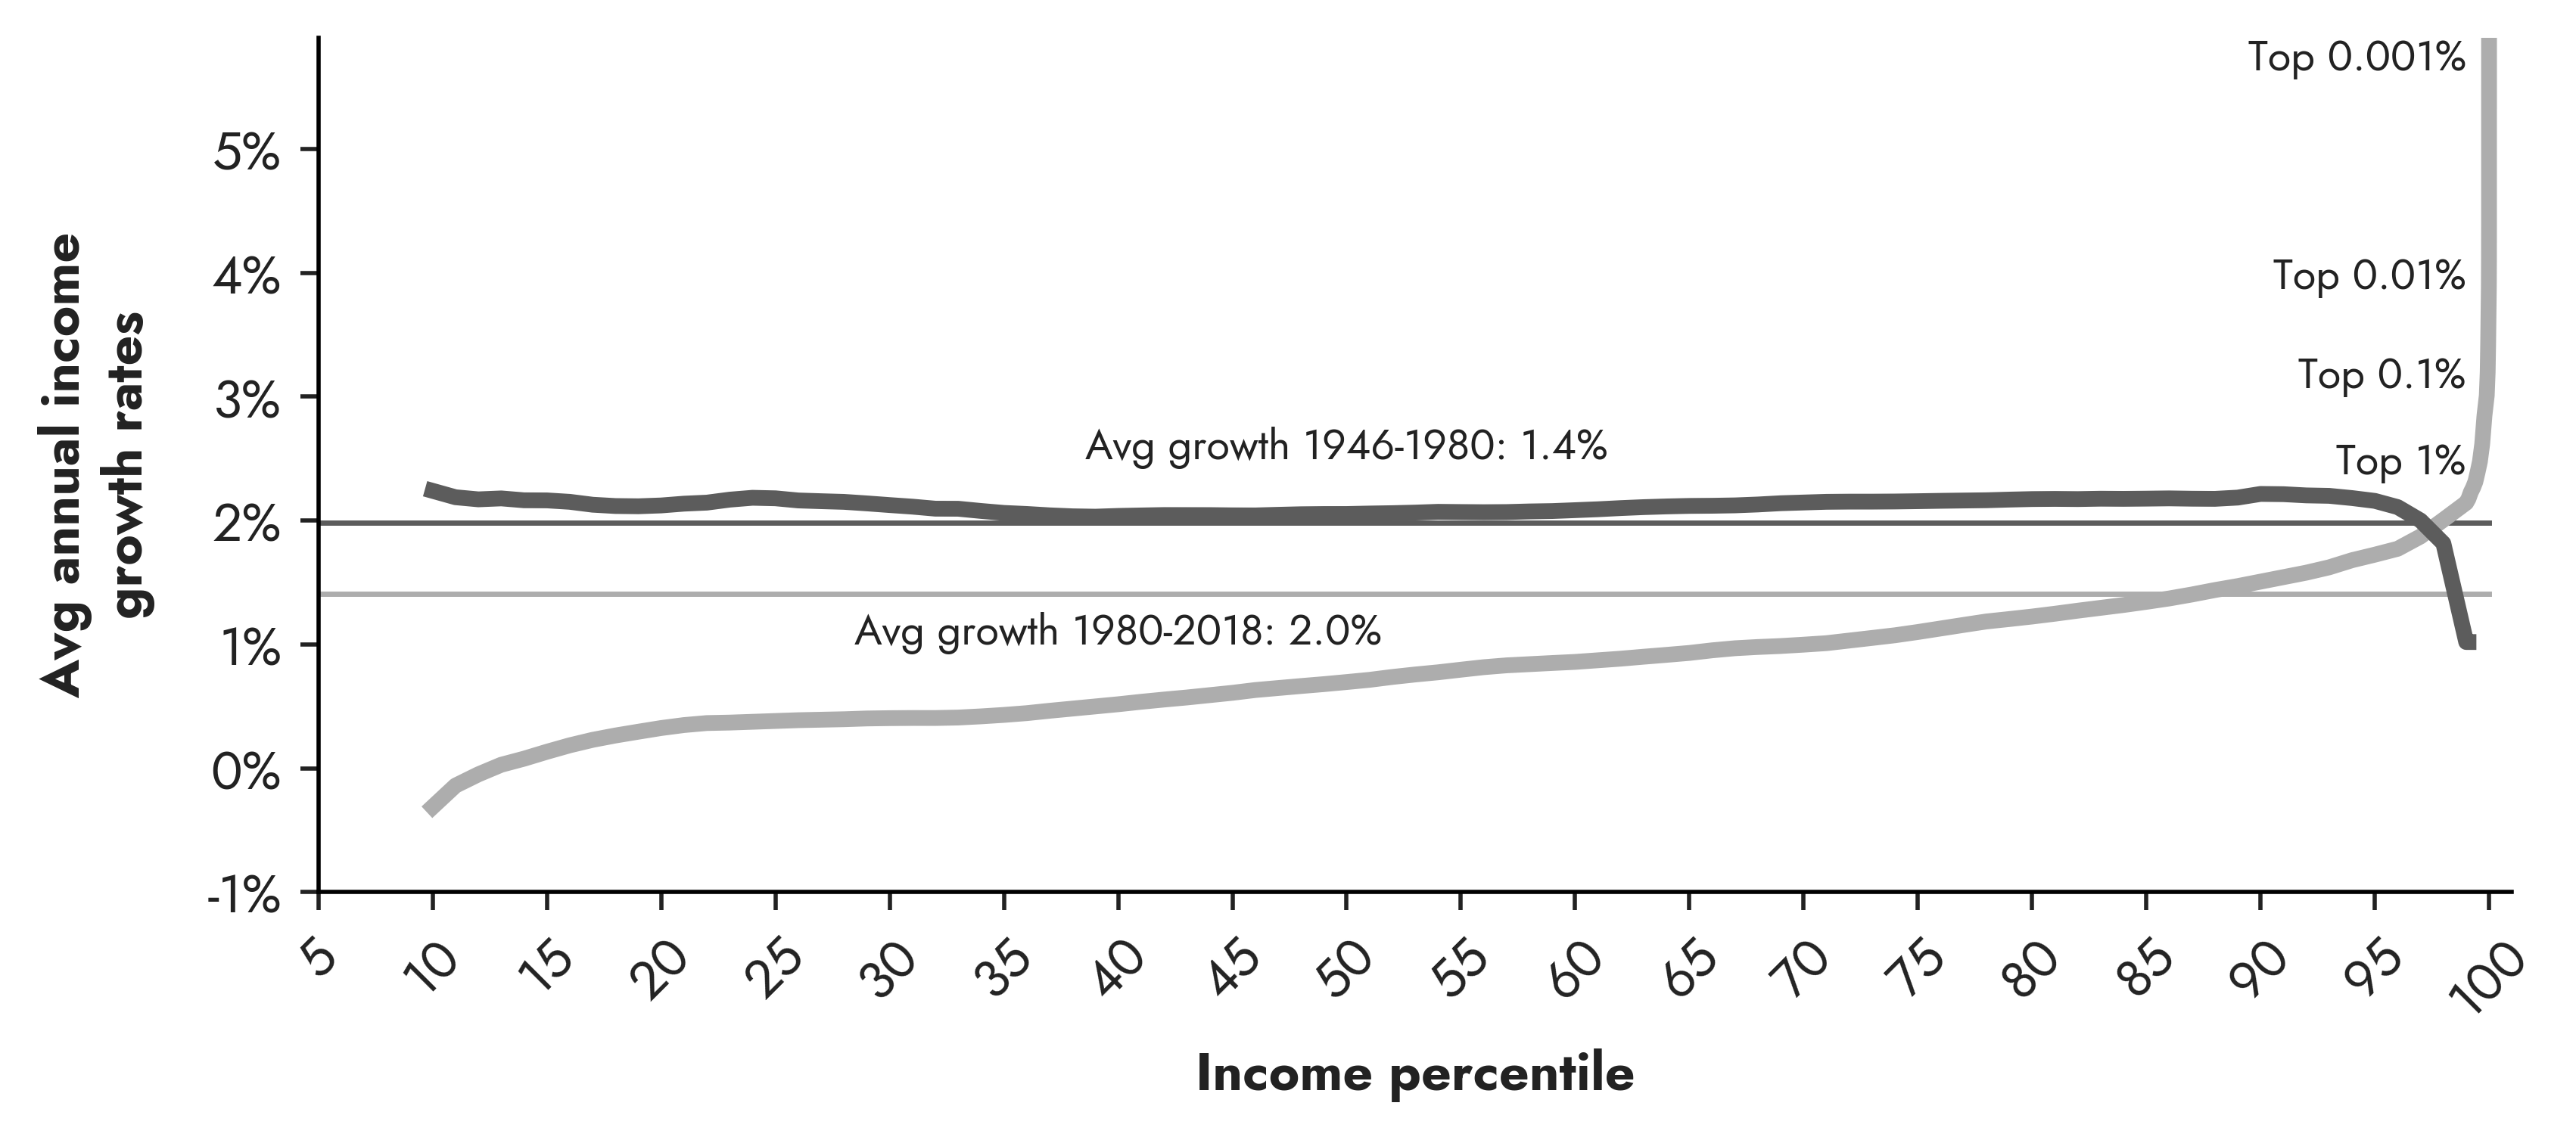 Shows that during the Golden Age, income growth was even across the income distribution, but lower at the very top, while duing the Great Stagnation it was lower over all but high at the very top.